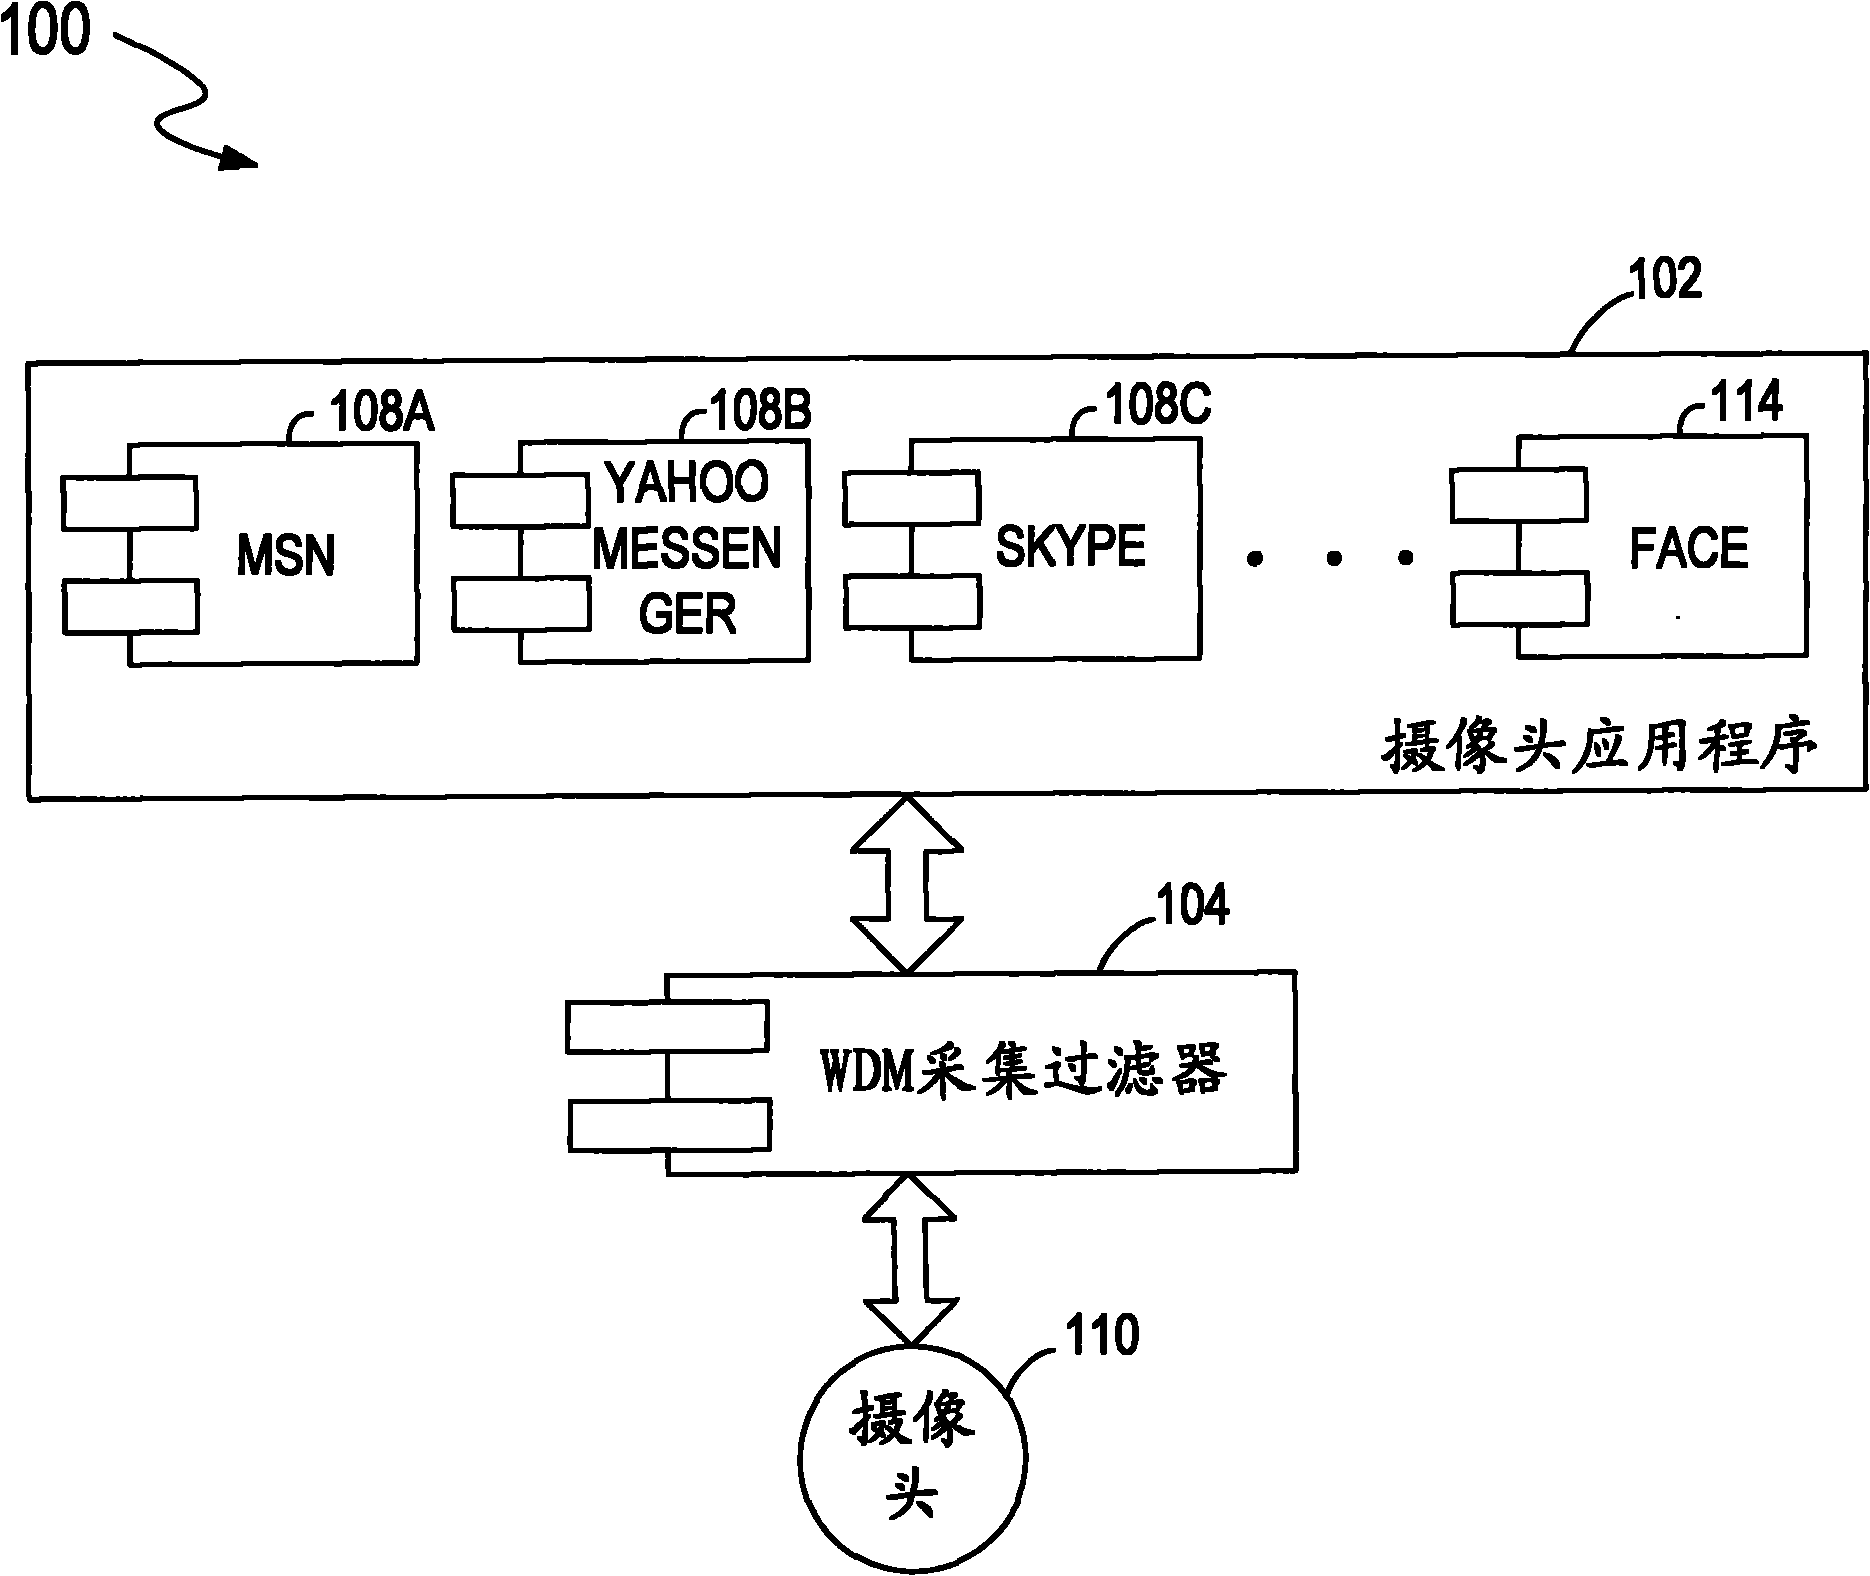 Method for simultaneously utilizing one camera by computer system and a plurality of application programs